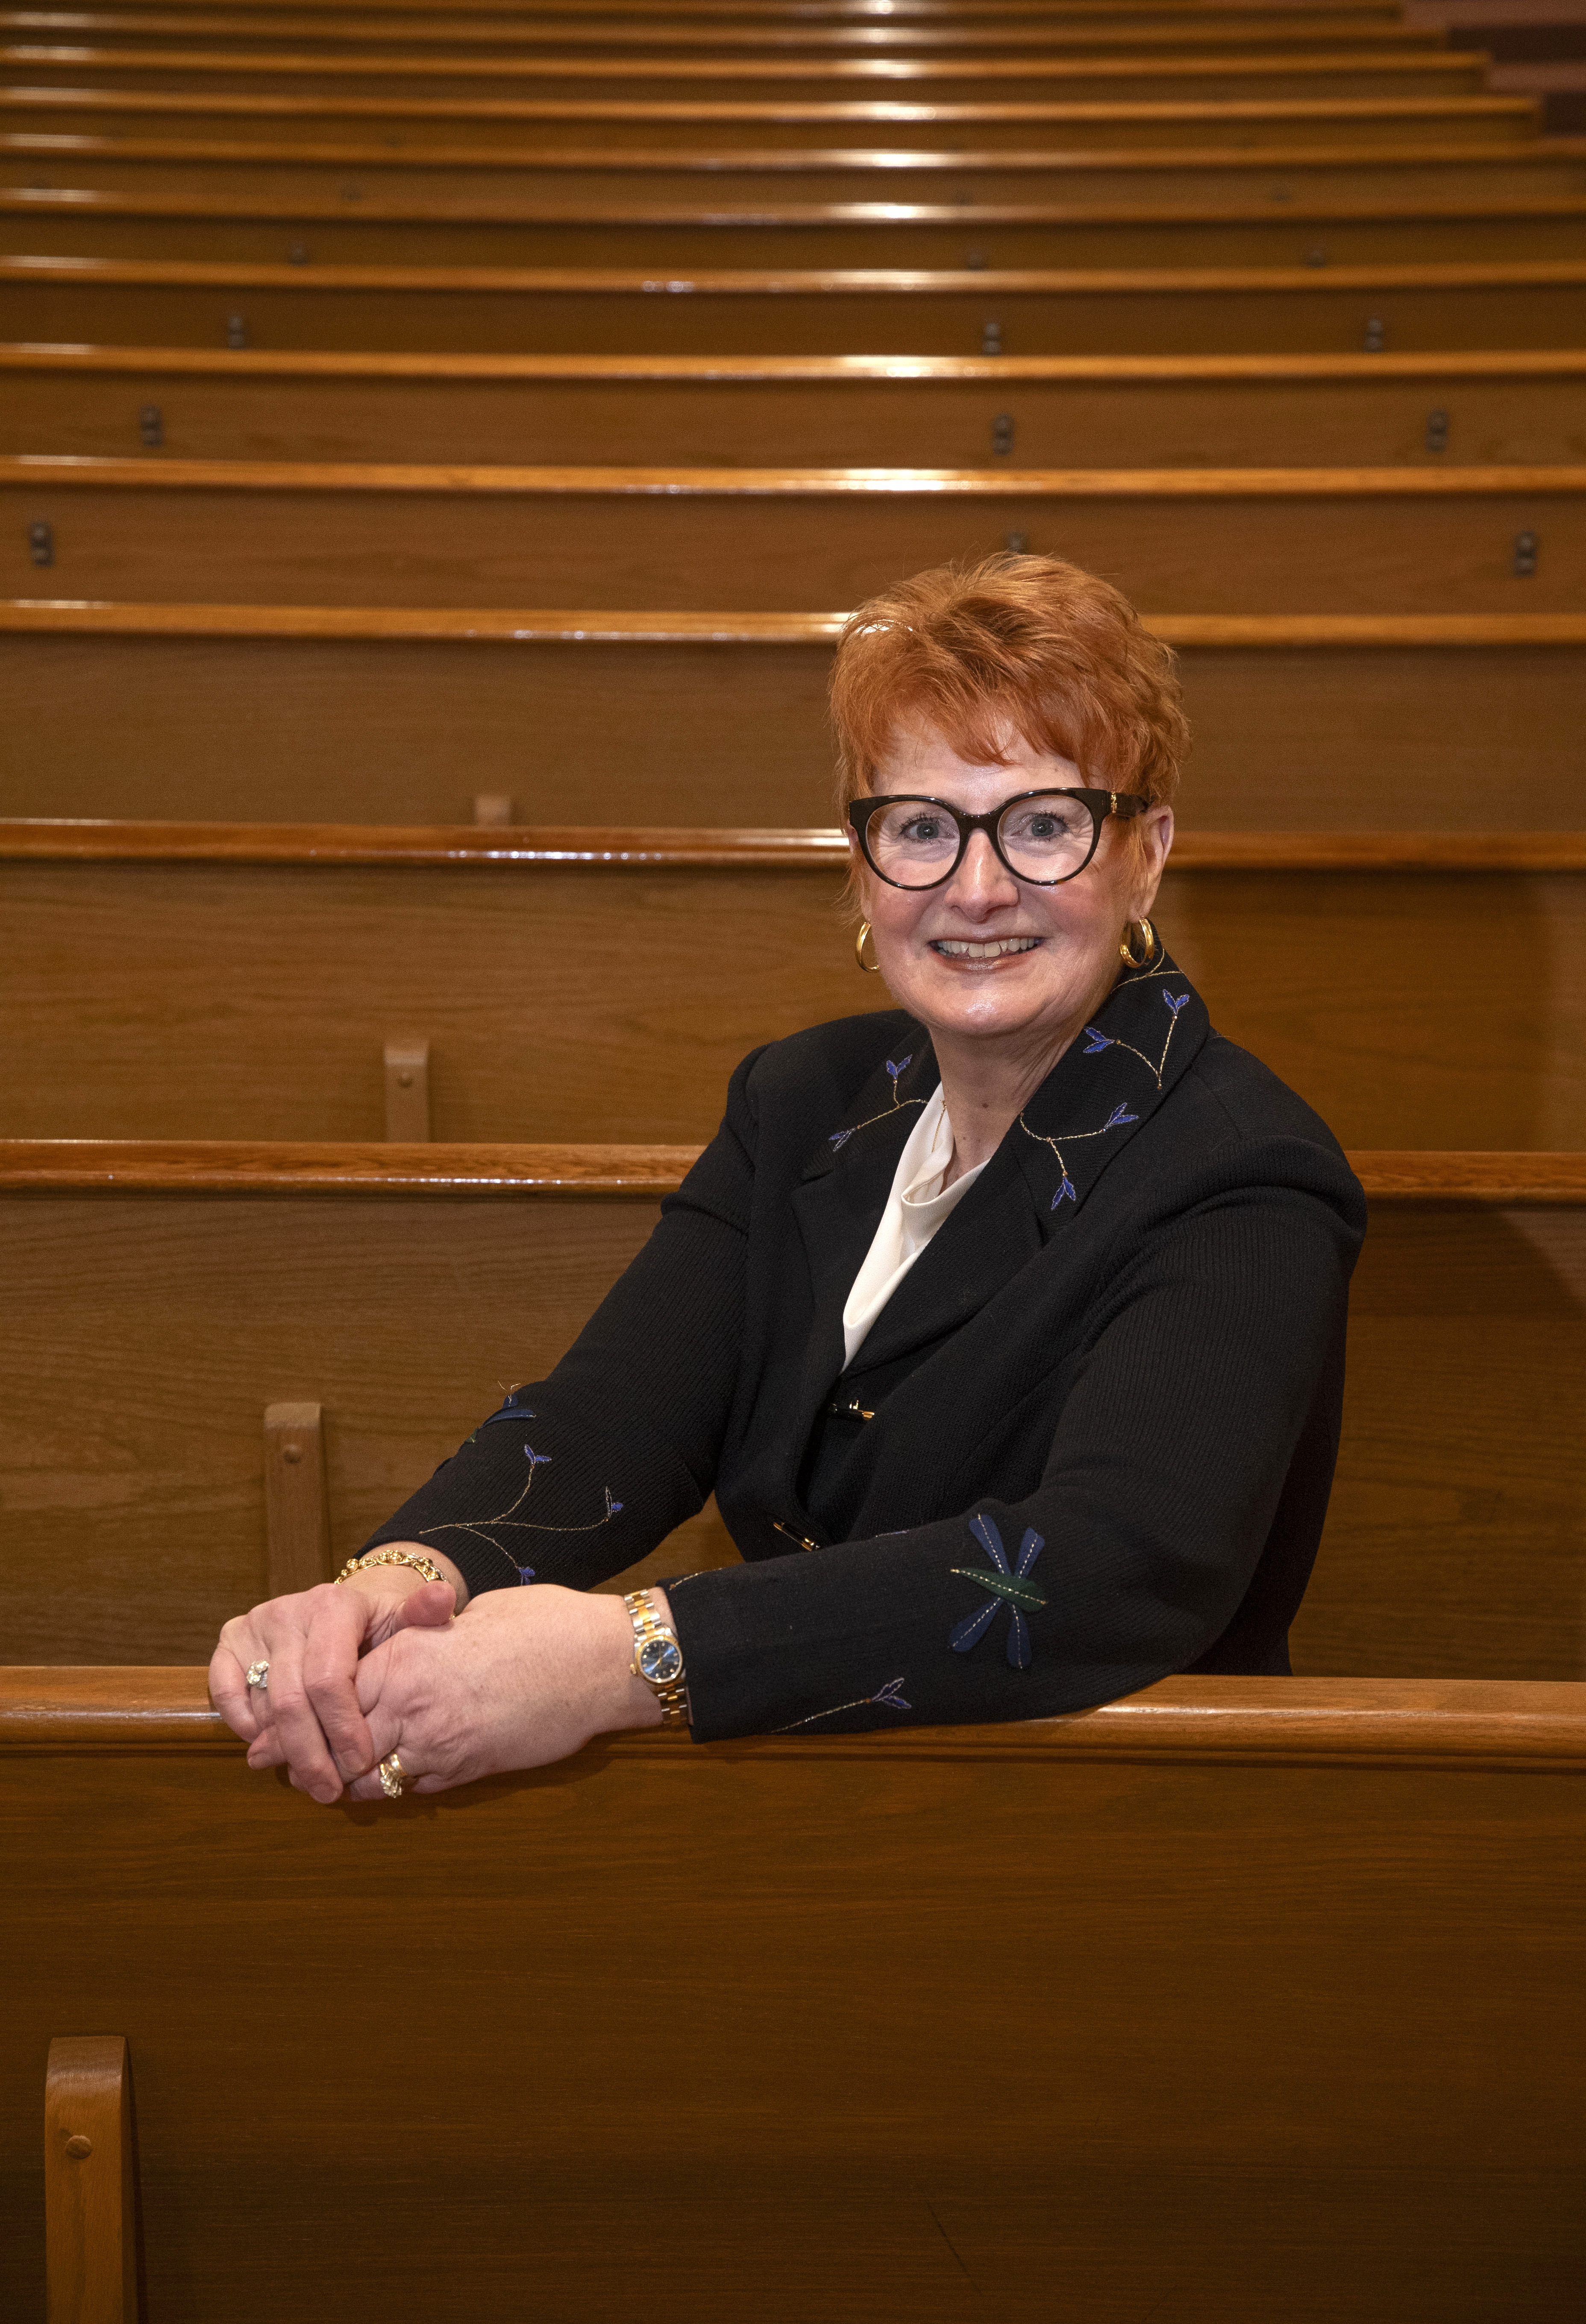 Laura Schiebert, director of faith formation for Our Lady of Grace Parish